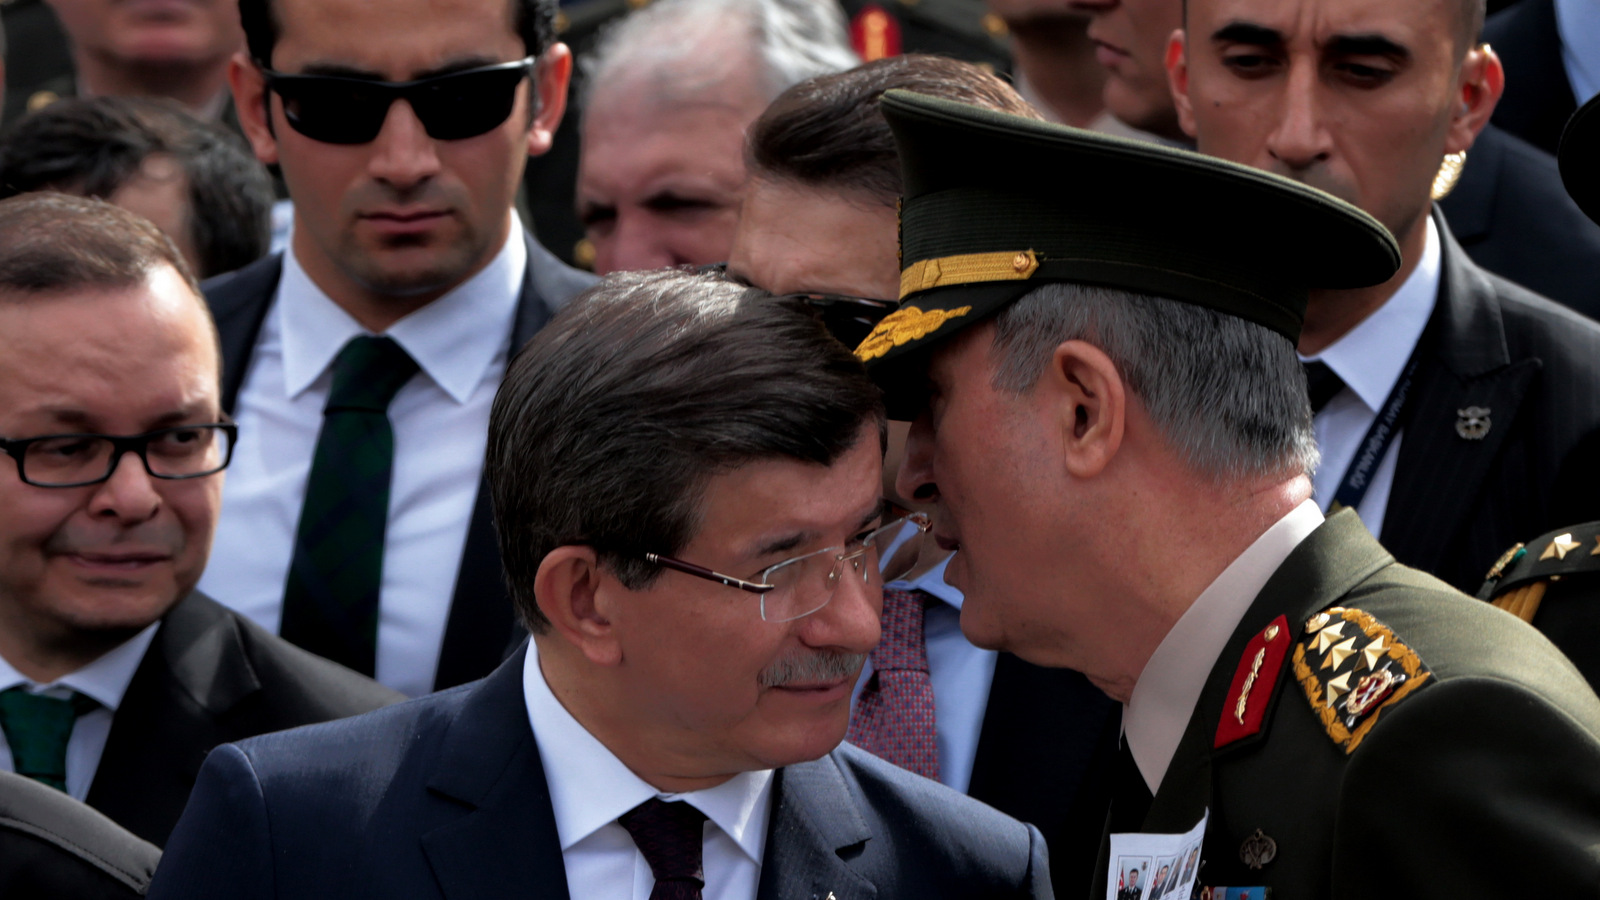 Turkey's Chief of Staff Gen. Hulusi Akar, right, whispers into the ear of Prime Minister Ahmet Davutoglu. (AP Photo/Burhan Ozbilici)